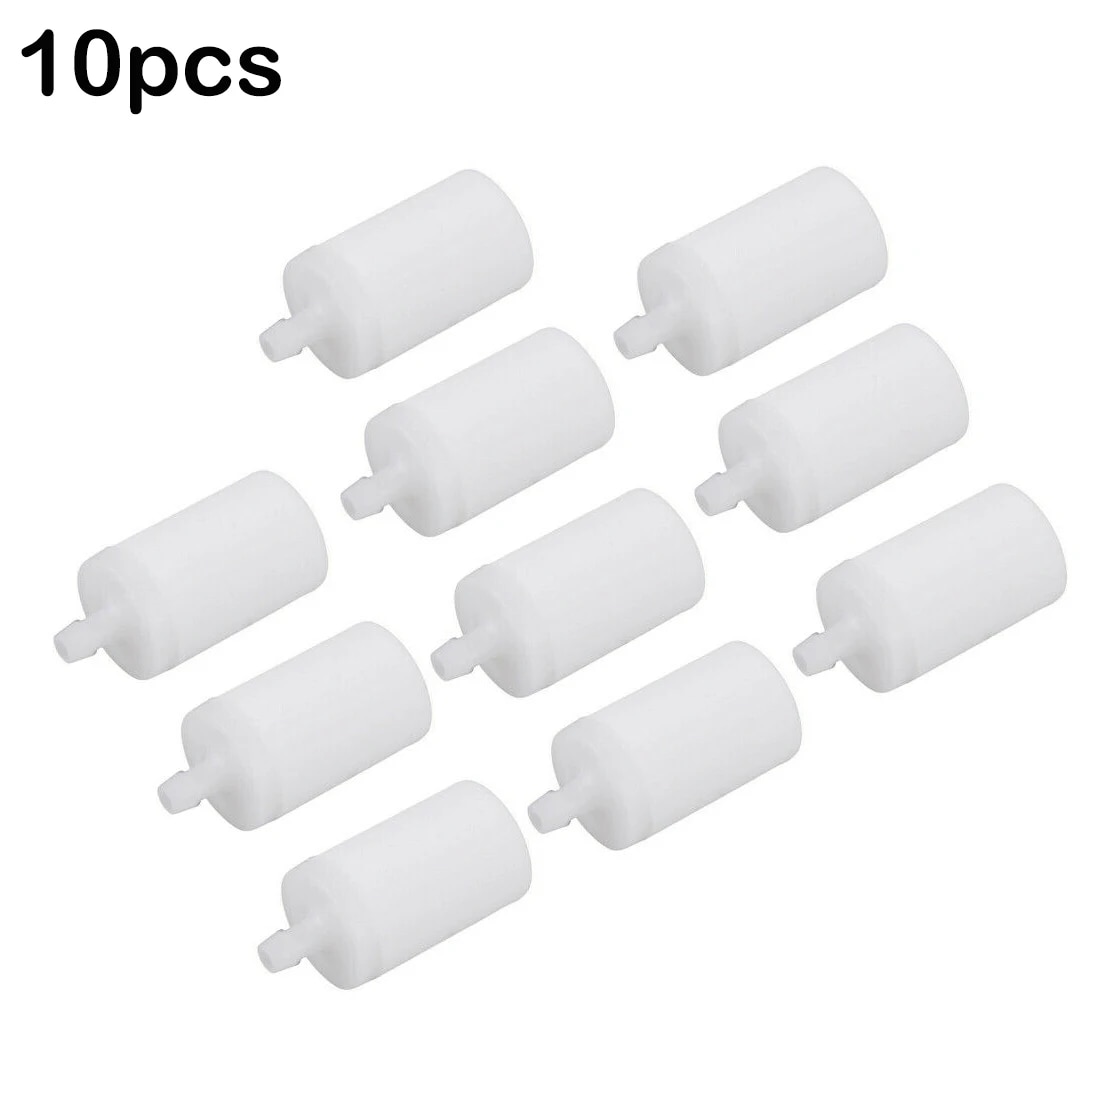 【Unforgettable】 10pcs 6mm Gas Fuel Filter Fit For Husqvarna Chainsaw 50 51 55 61 268 272 Xp 345 350 351 353 503 44 32-01